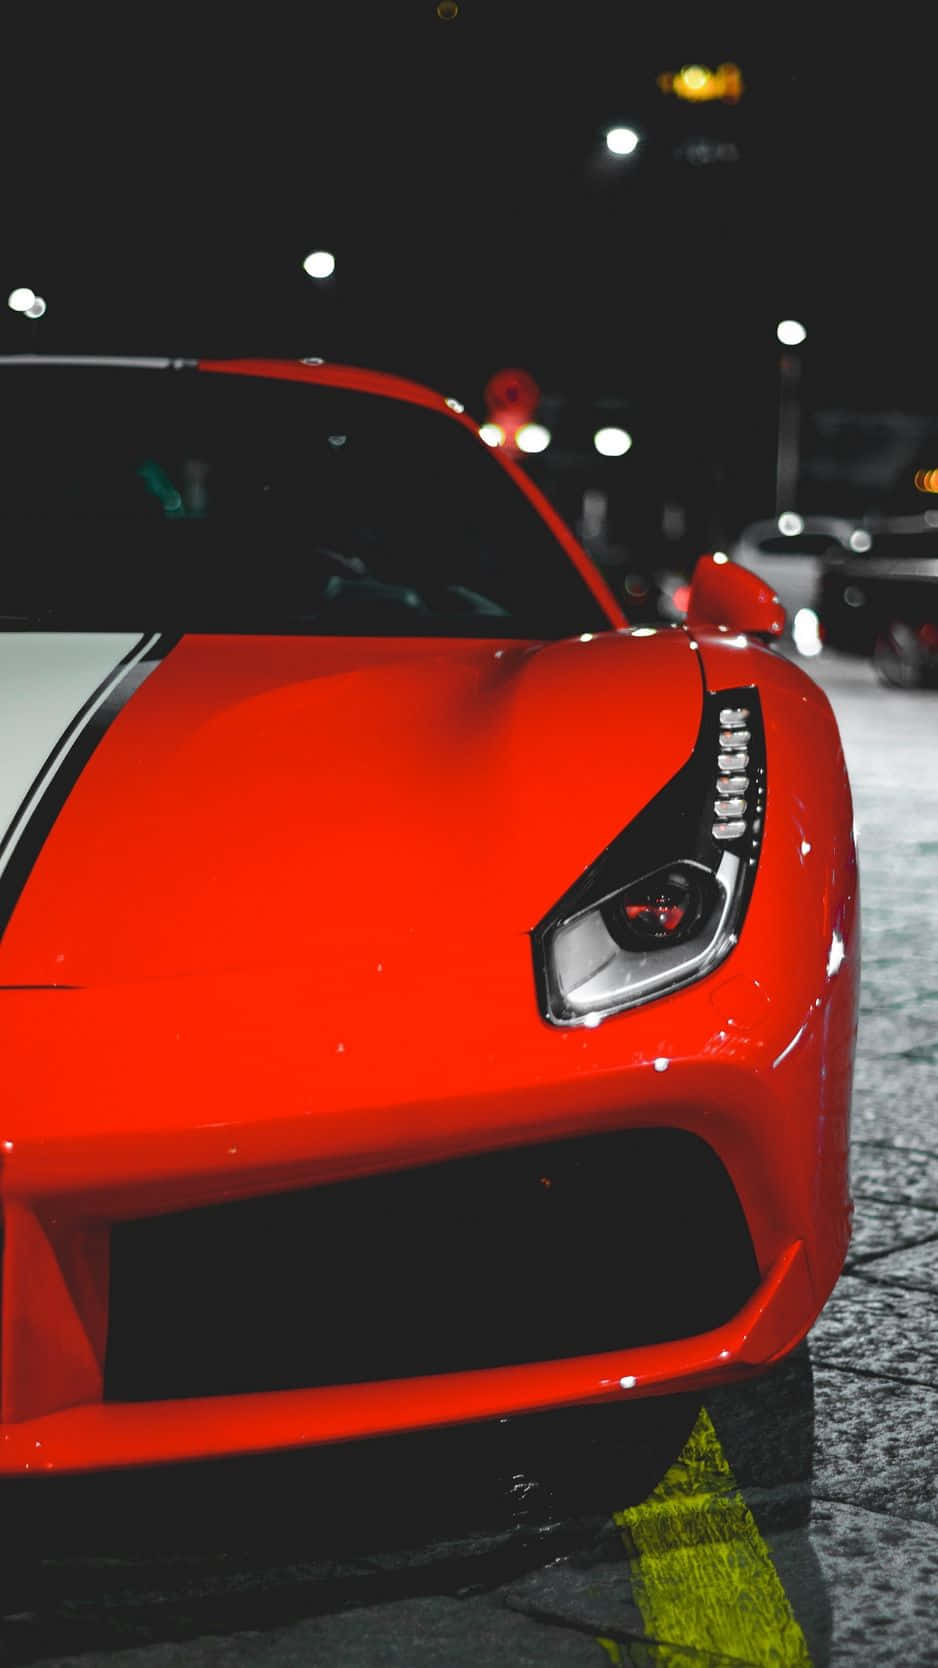 Stand Out from the Crowd with the Stylish Red Car iPhone Wallpaper